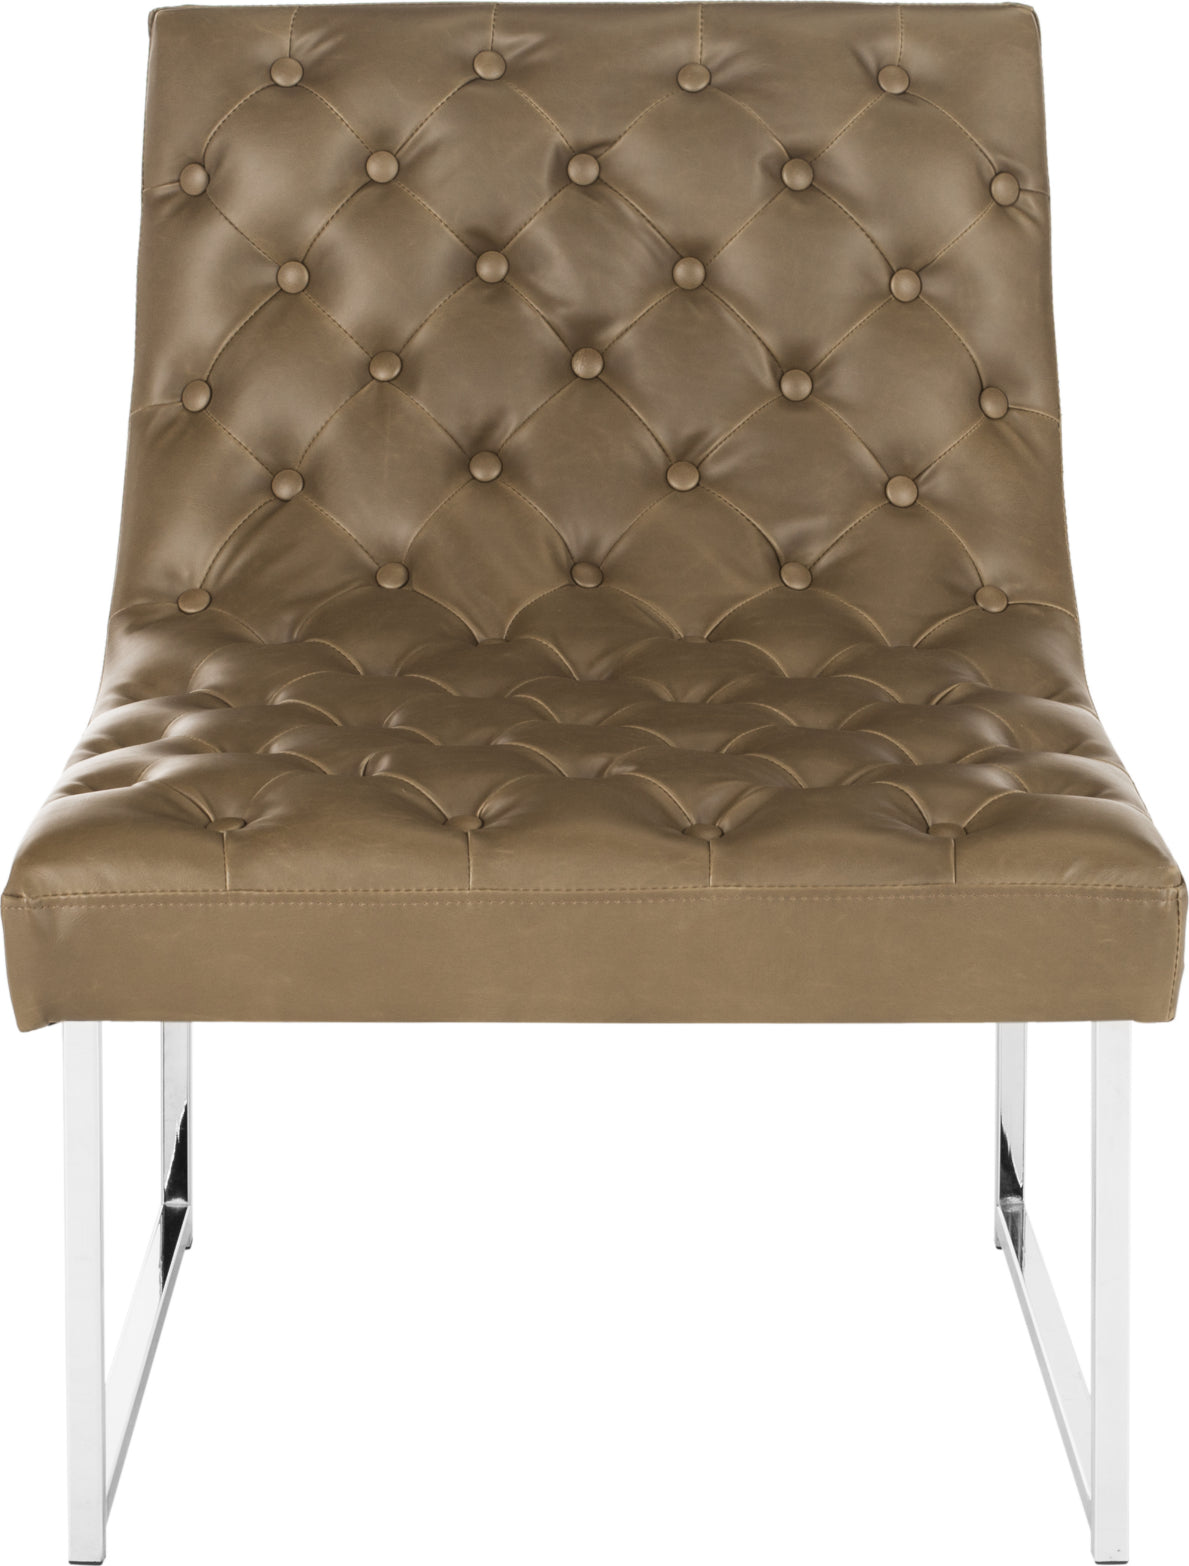 Safavieh Hadley Leather Tufted Accent Chair Antique Taupe Furniture main image